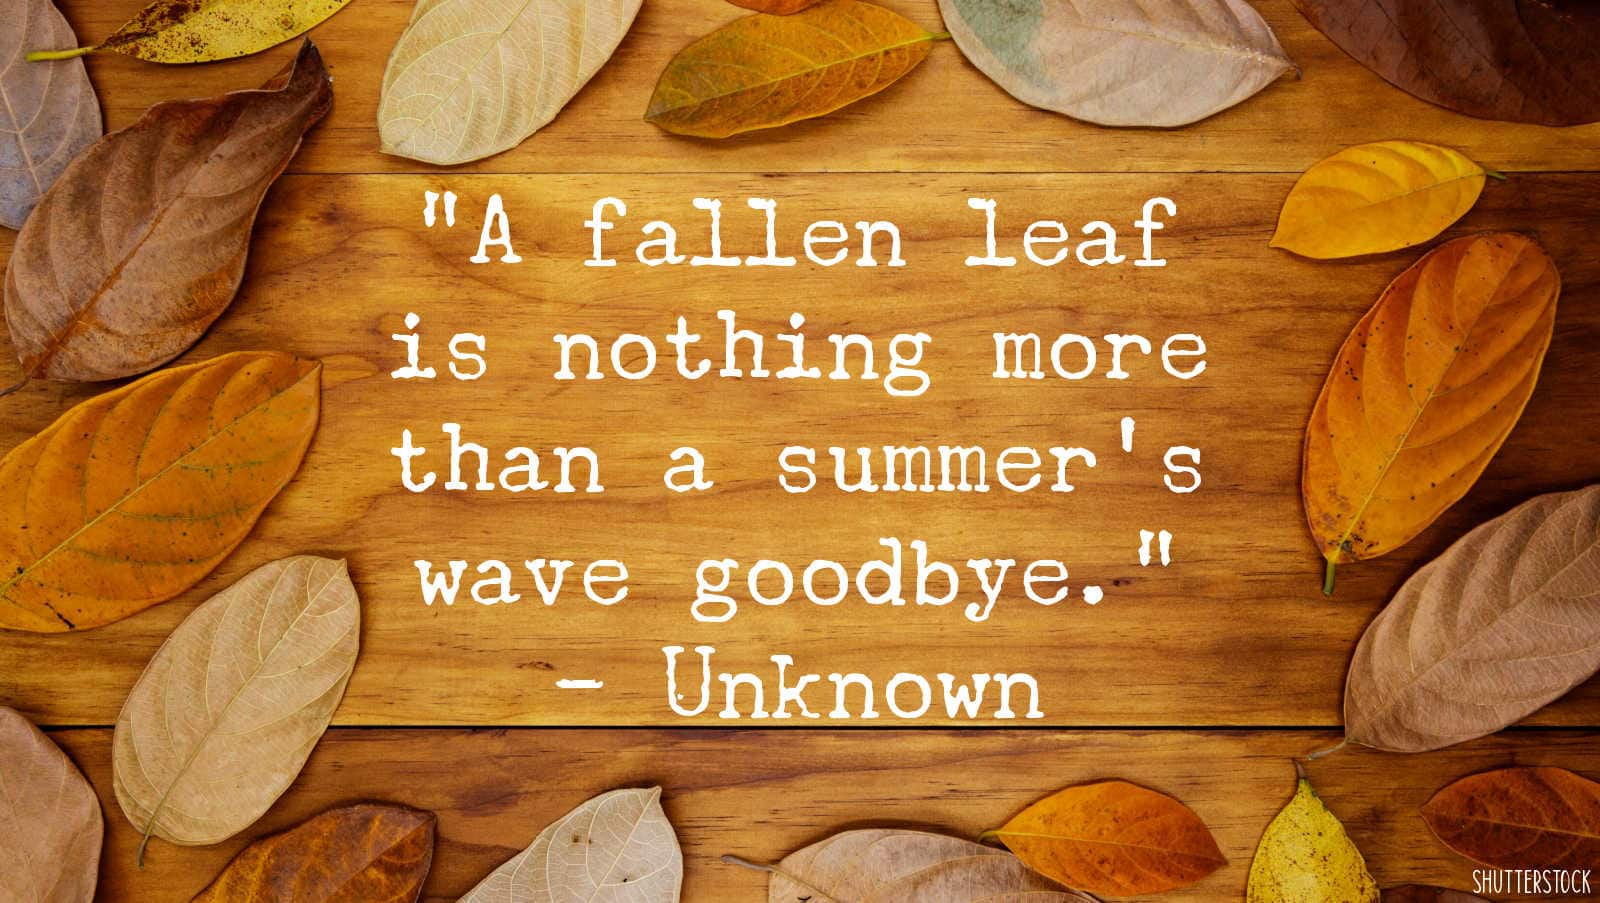 sayings and quotes about autumn and fall